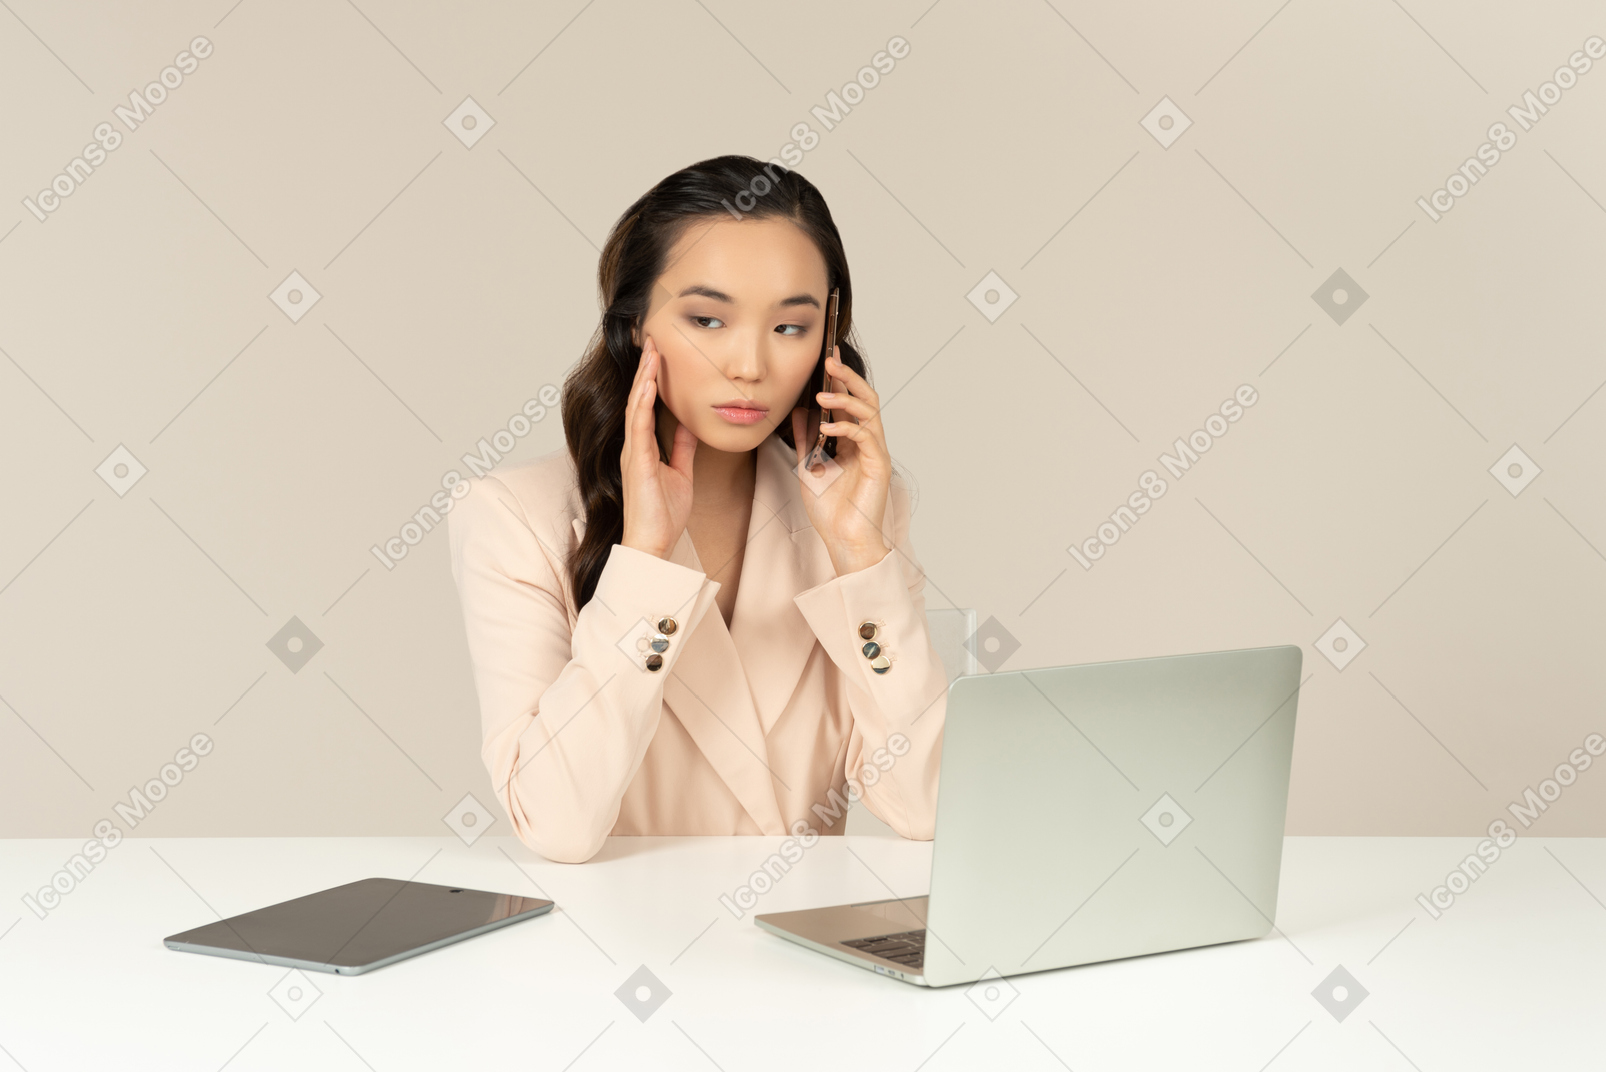 Asian female office employee looking bothered with phone call